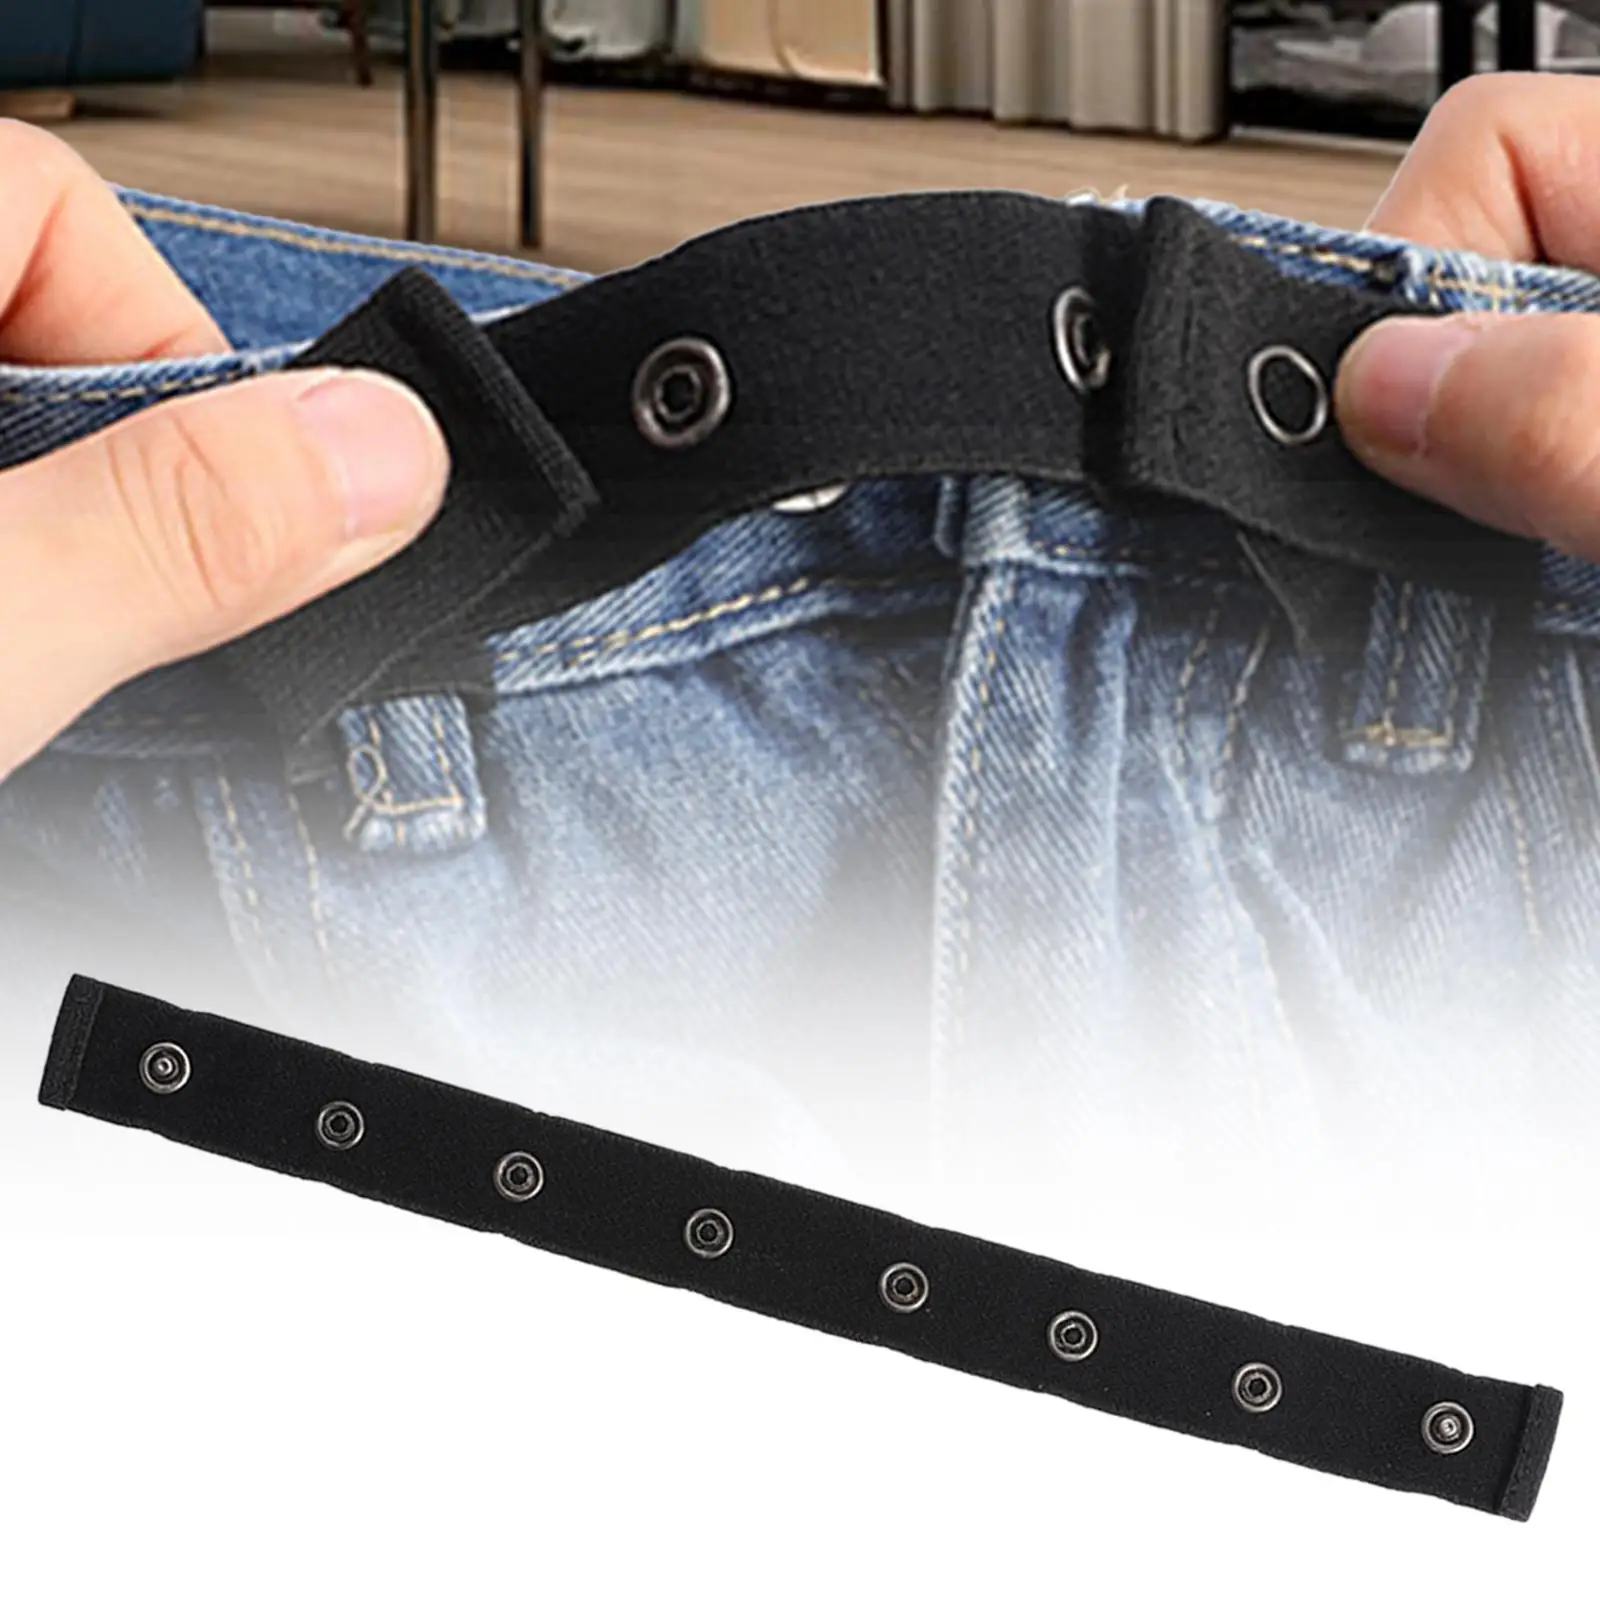 Elastic Belt Buckle Free Stretchy Unisex Waistband Waist Belt Adjustable Buckless Belt Invisible Without Buckle for Dress Pants